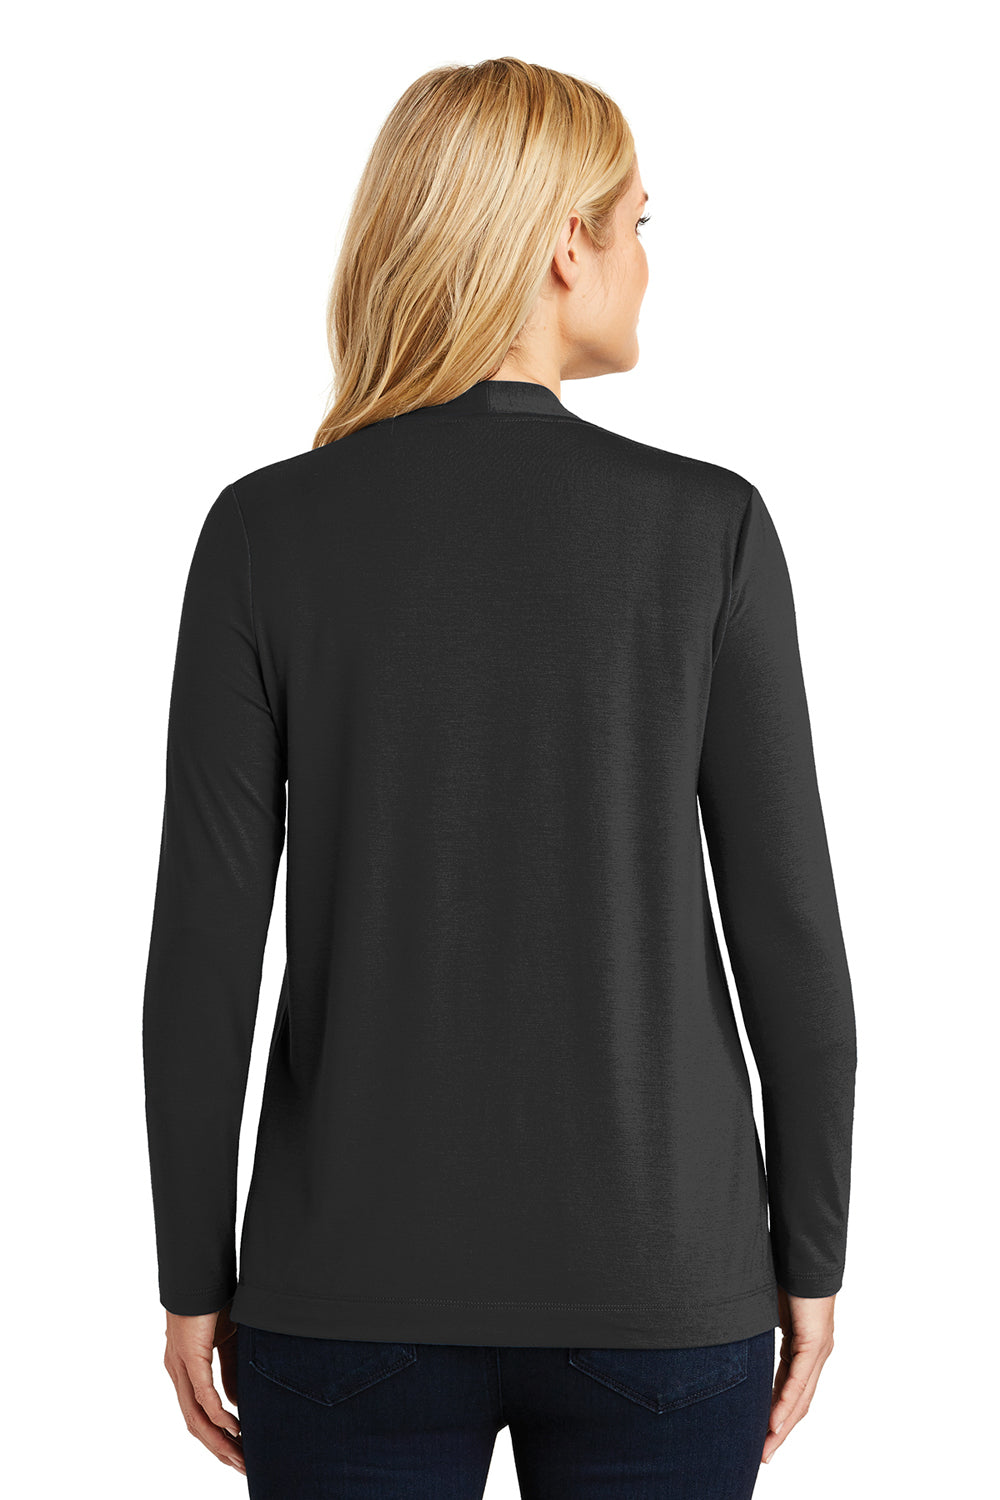 Port Authority L5430 Womens Concept Long Sleeve Cardigan Sweater Black Back